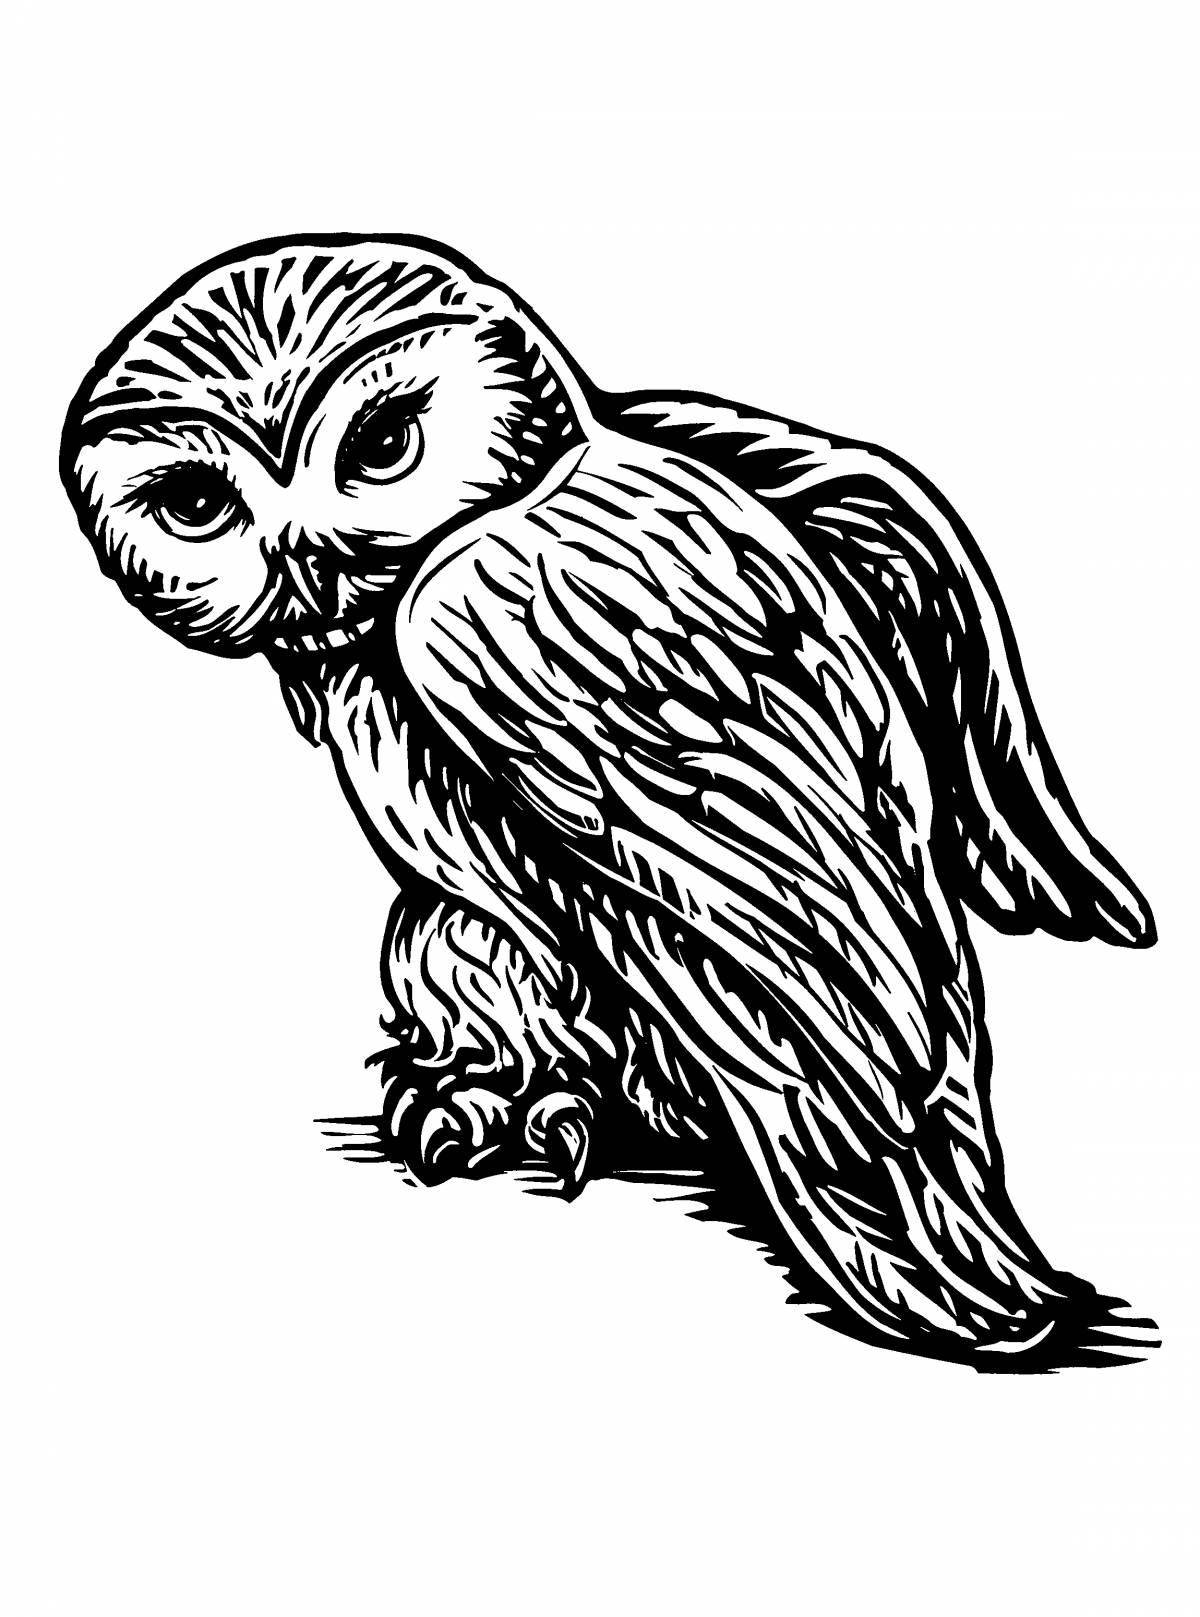 Bright coloring hedwig owl